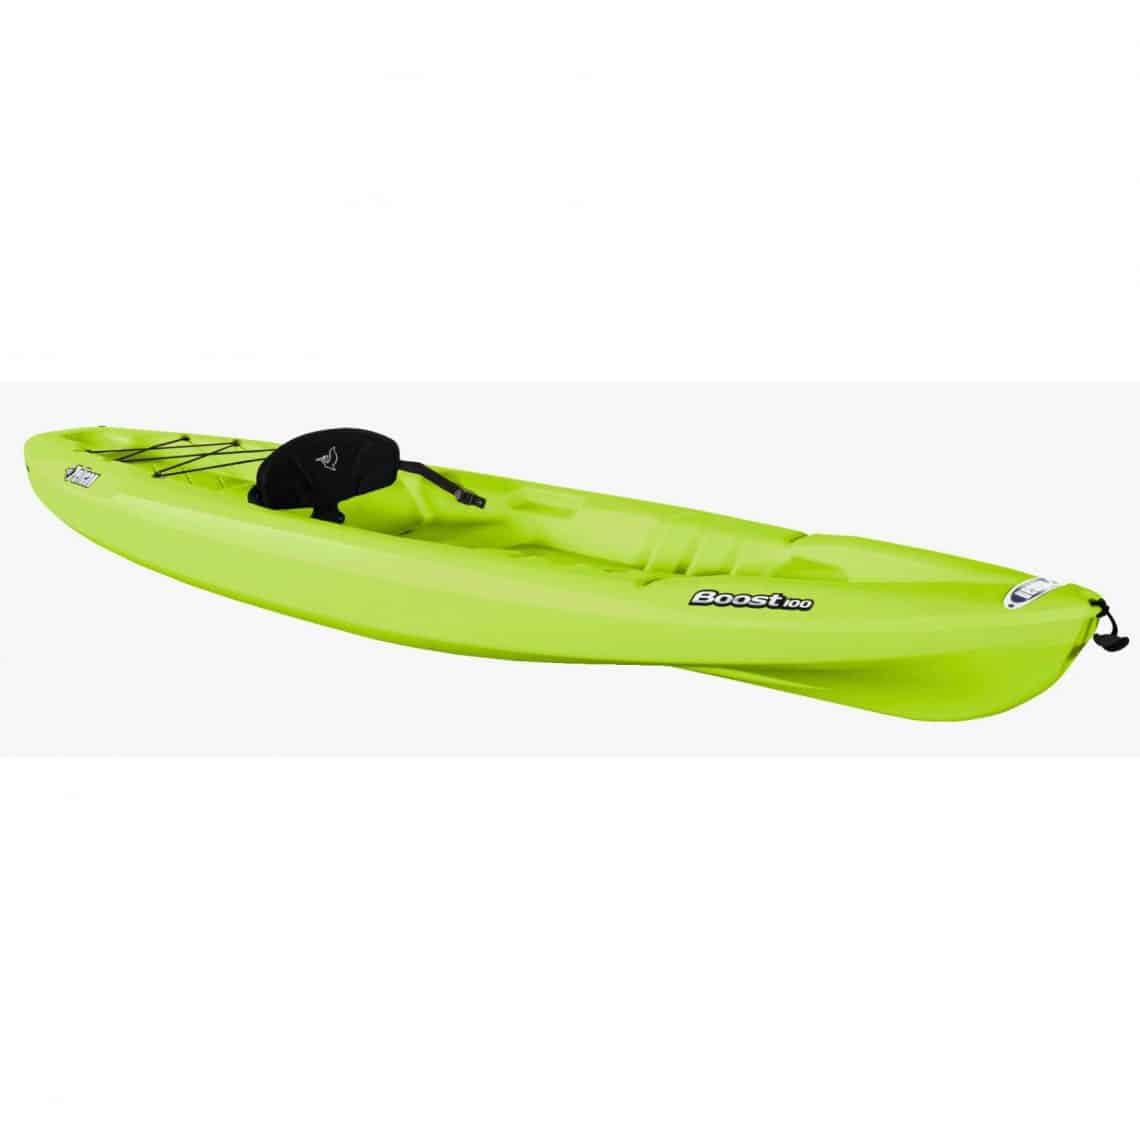 PELICAN BOOST 100 SIT ON KAYAK - Northwoods Wholesale Outlet